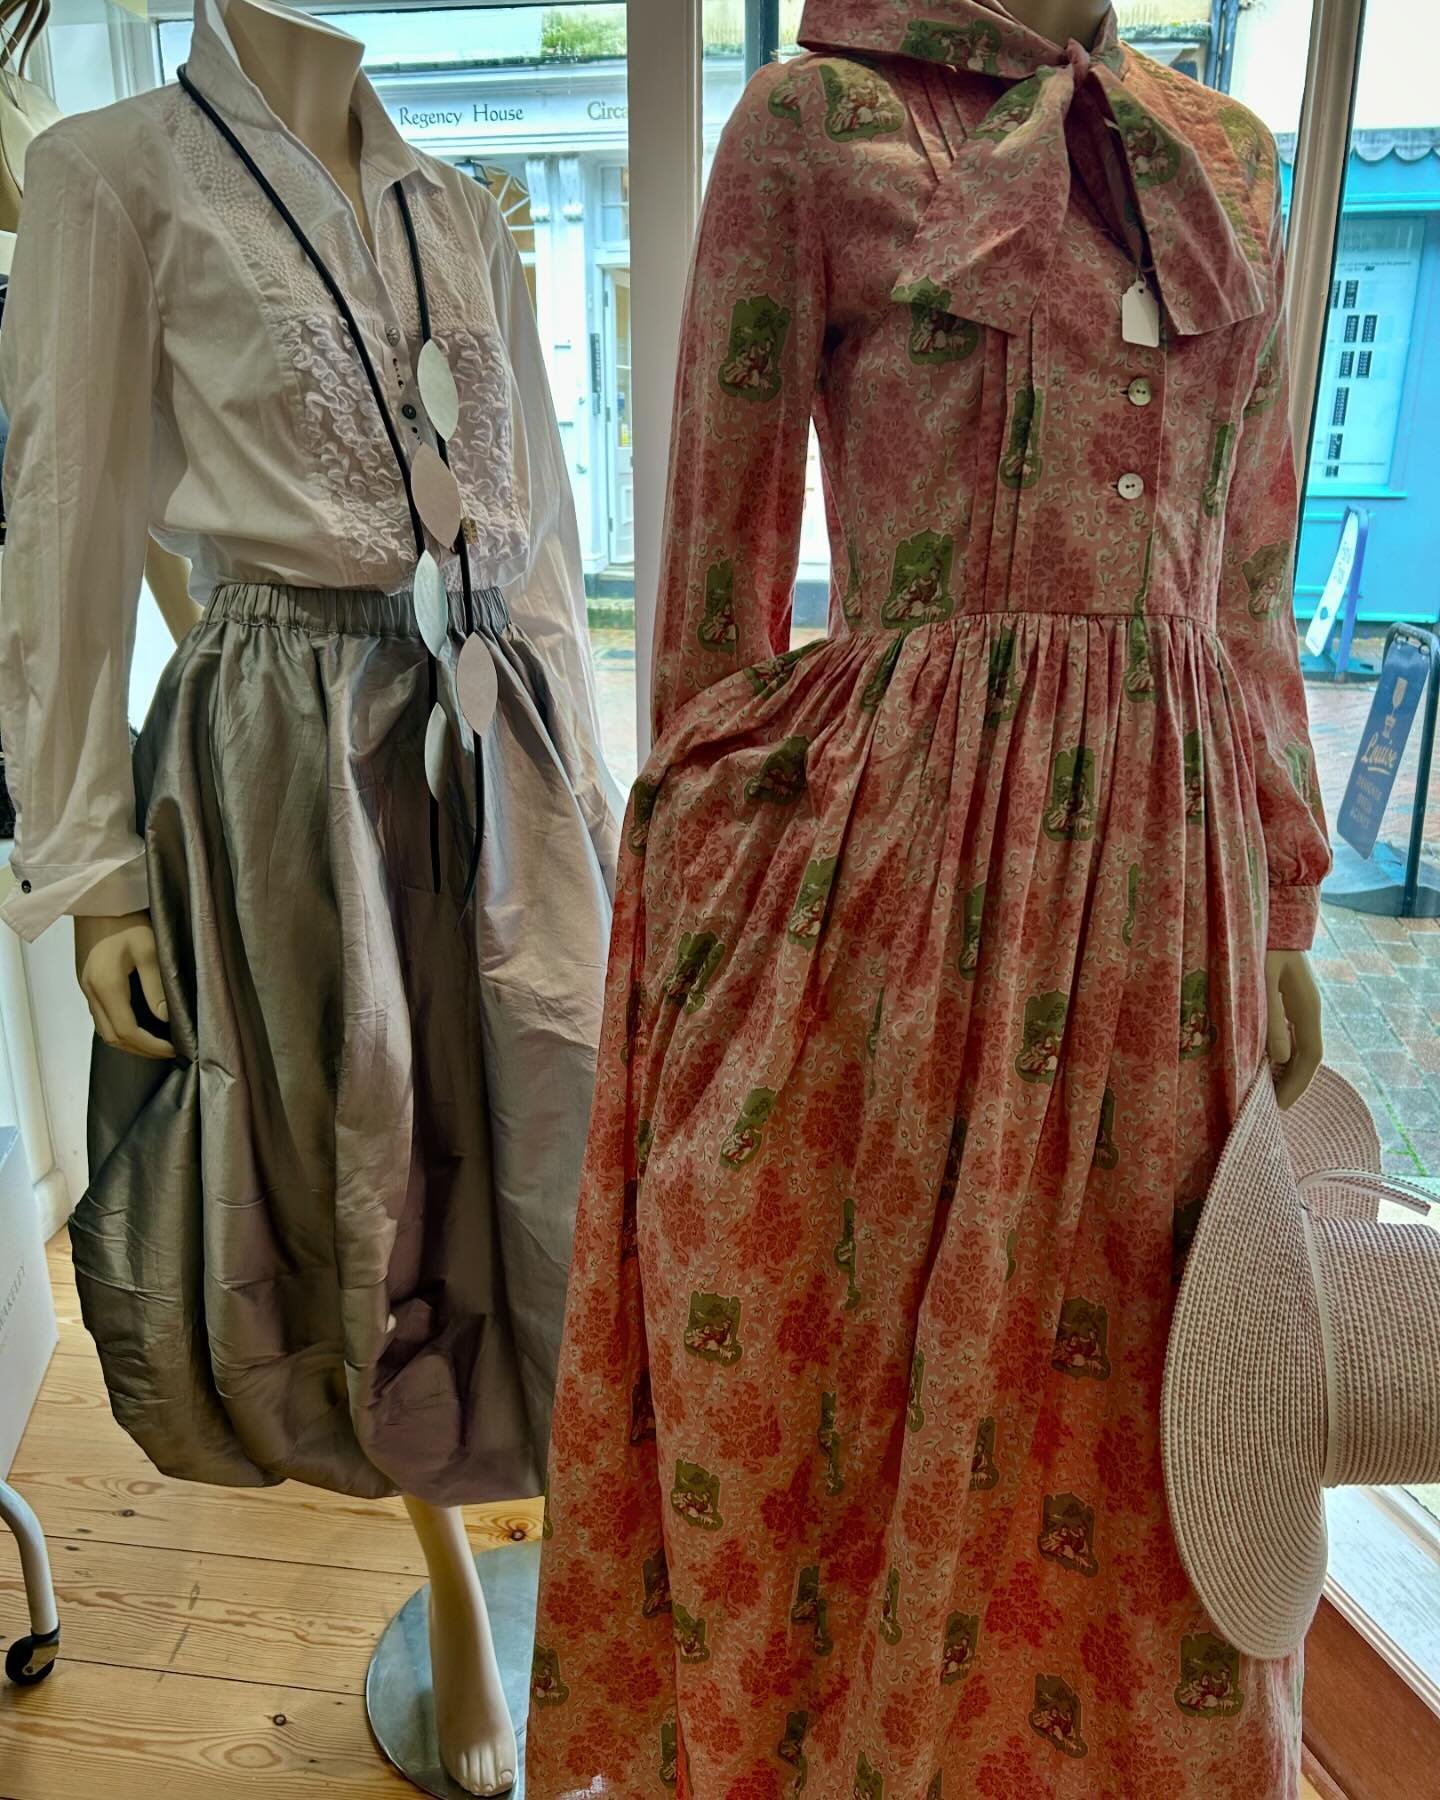 #vintagestyle dresses have just arrived plus don&rsquo;t forget weddings